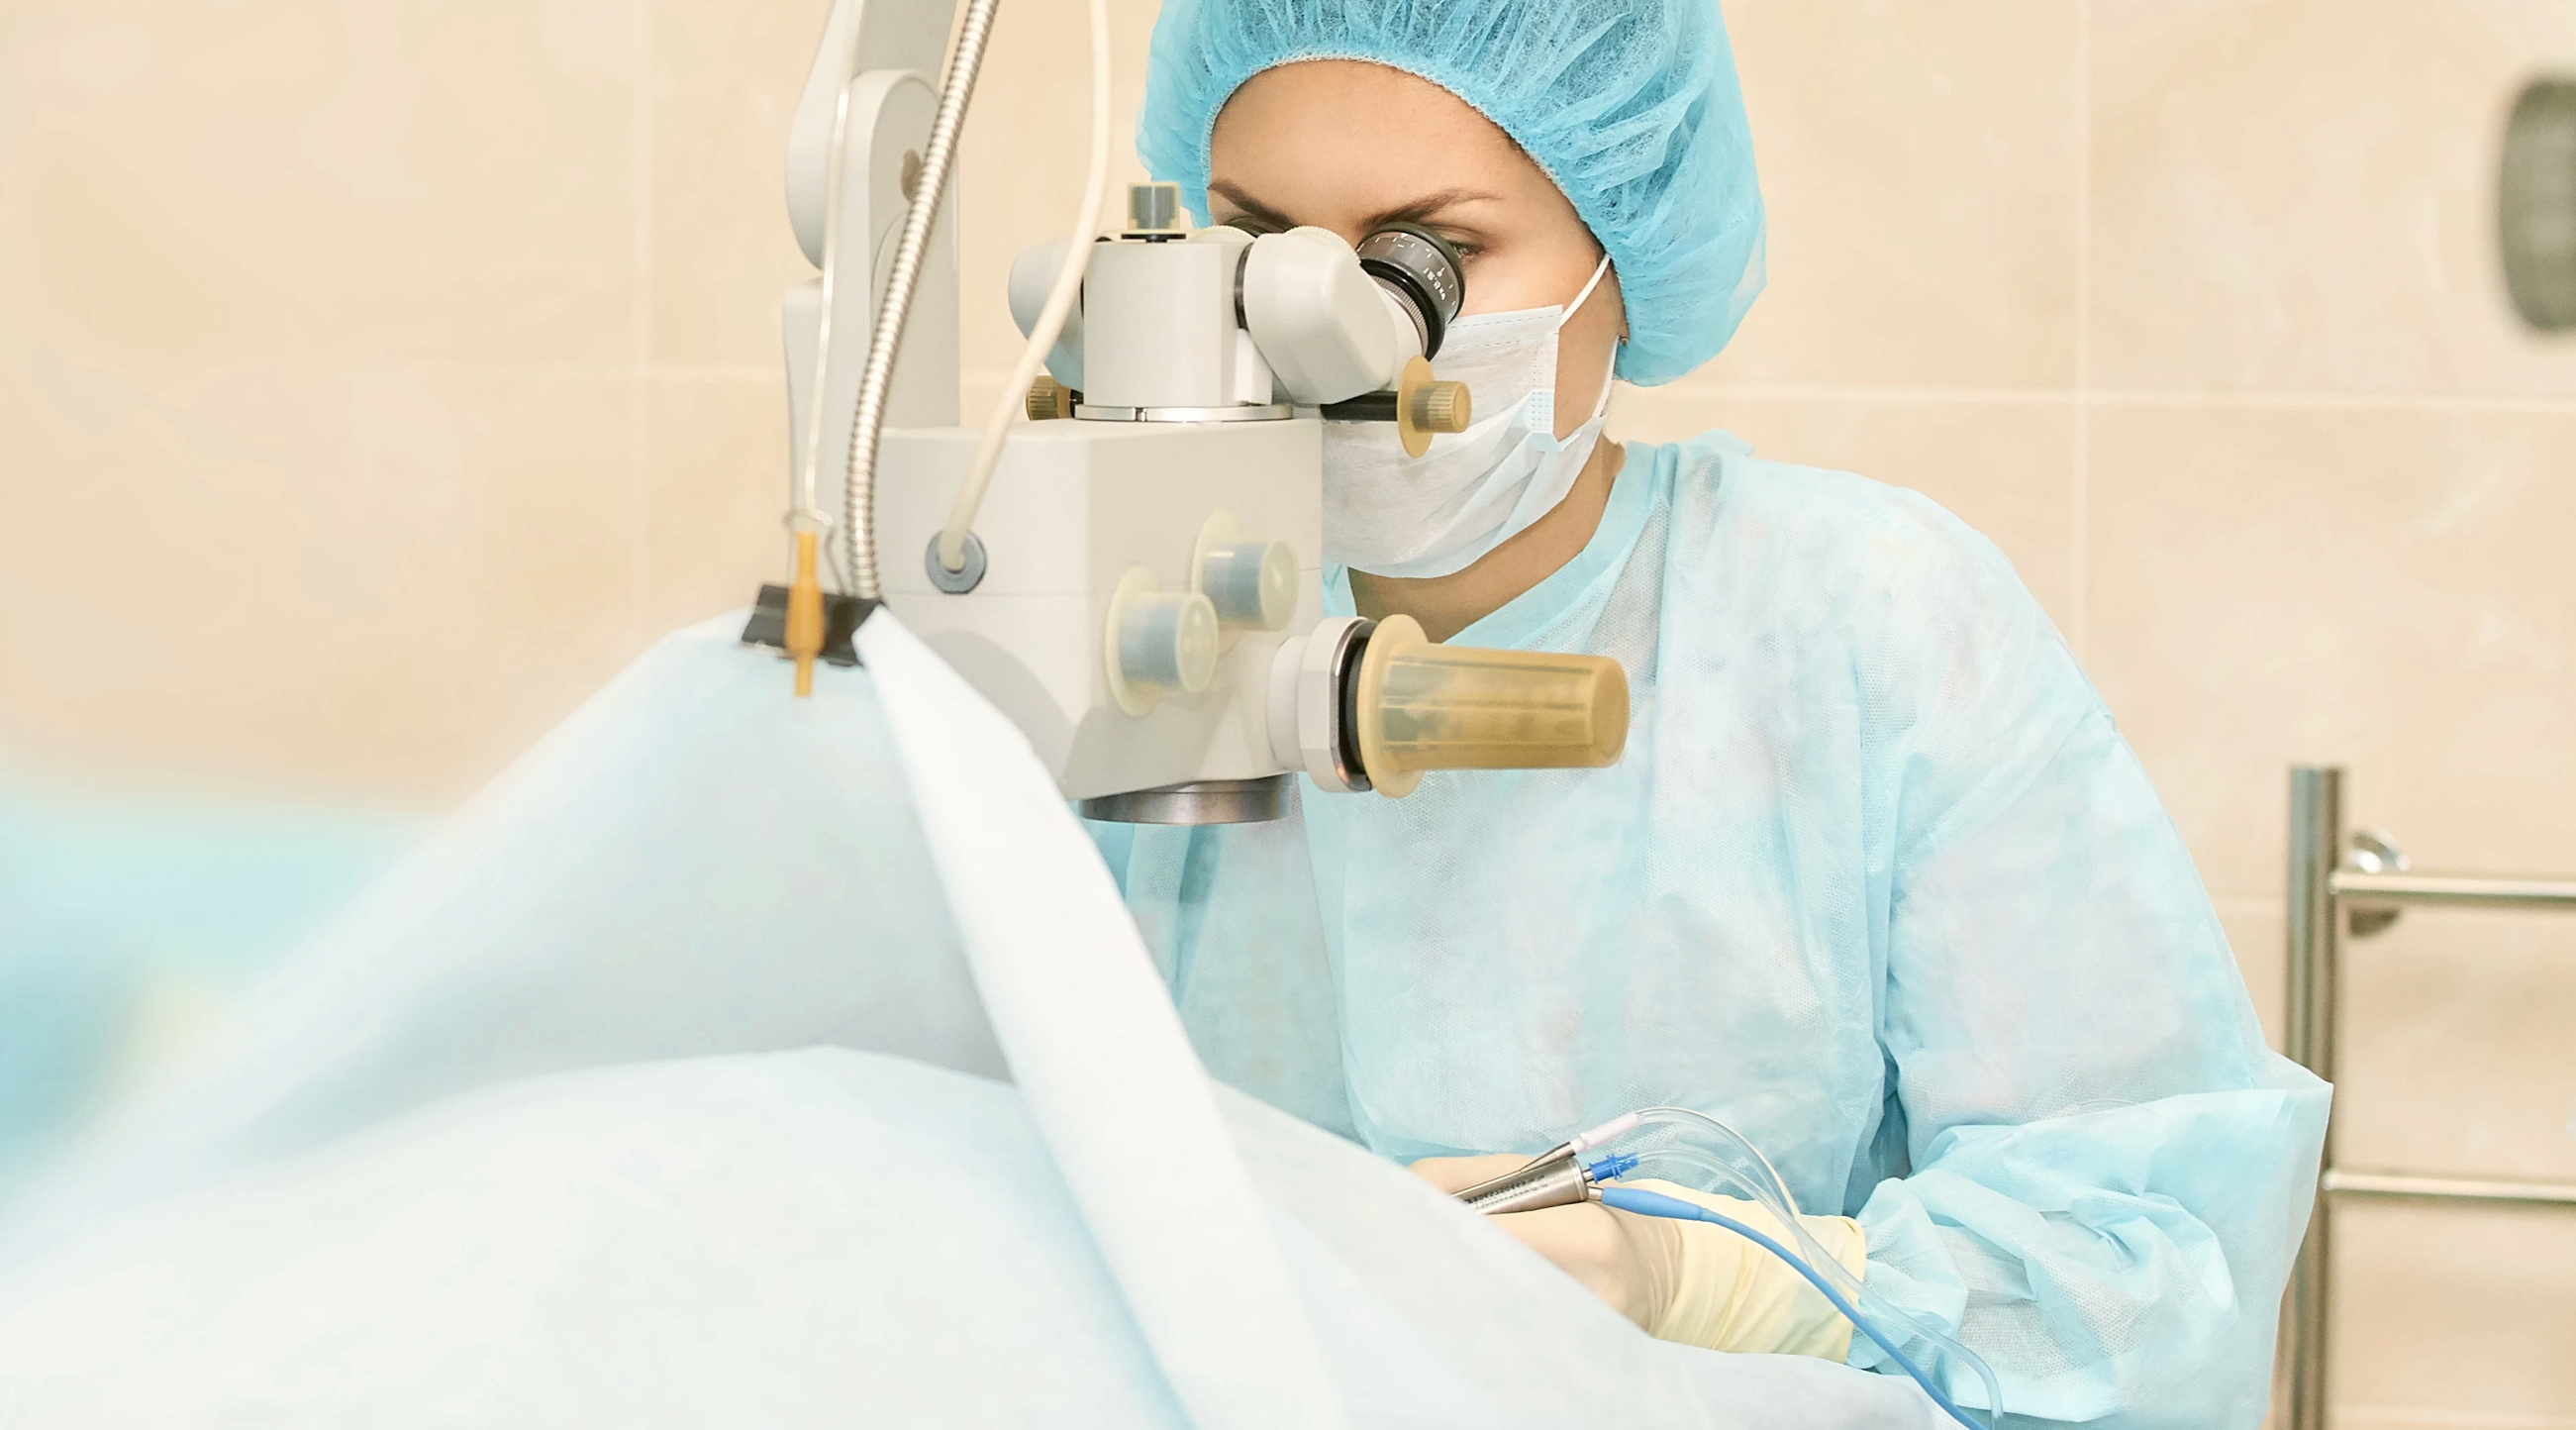 Laser vision correction procedures soar in wake of COVID-19